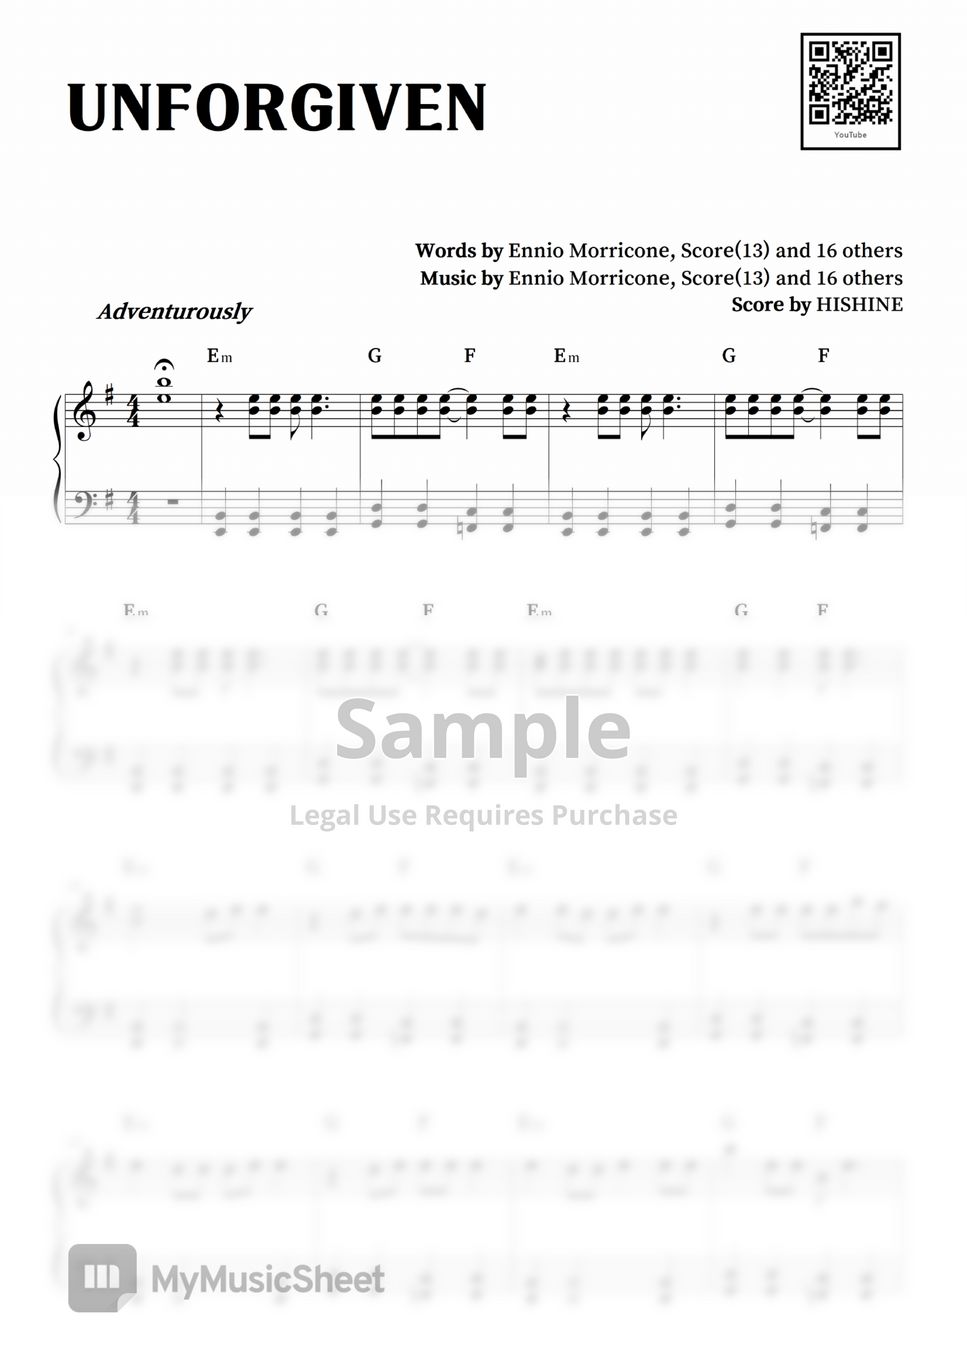 LE SSERAFIM - UNFORGIVEN (with easy ver.) Sheets by HISHINE